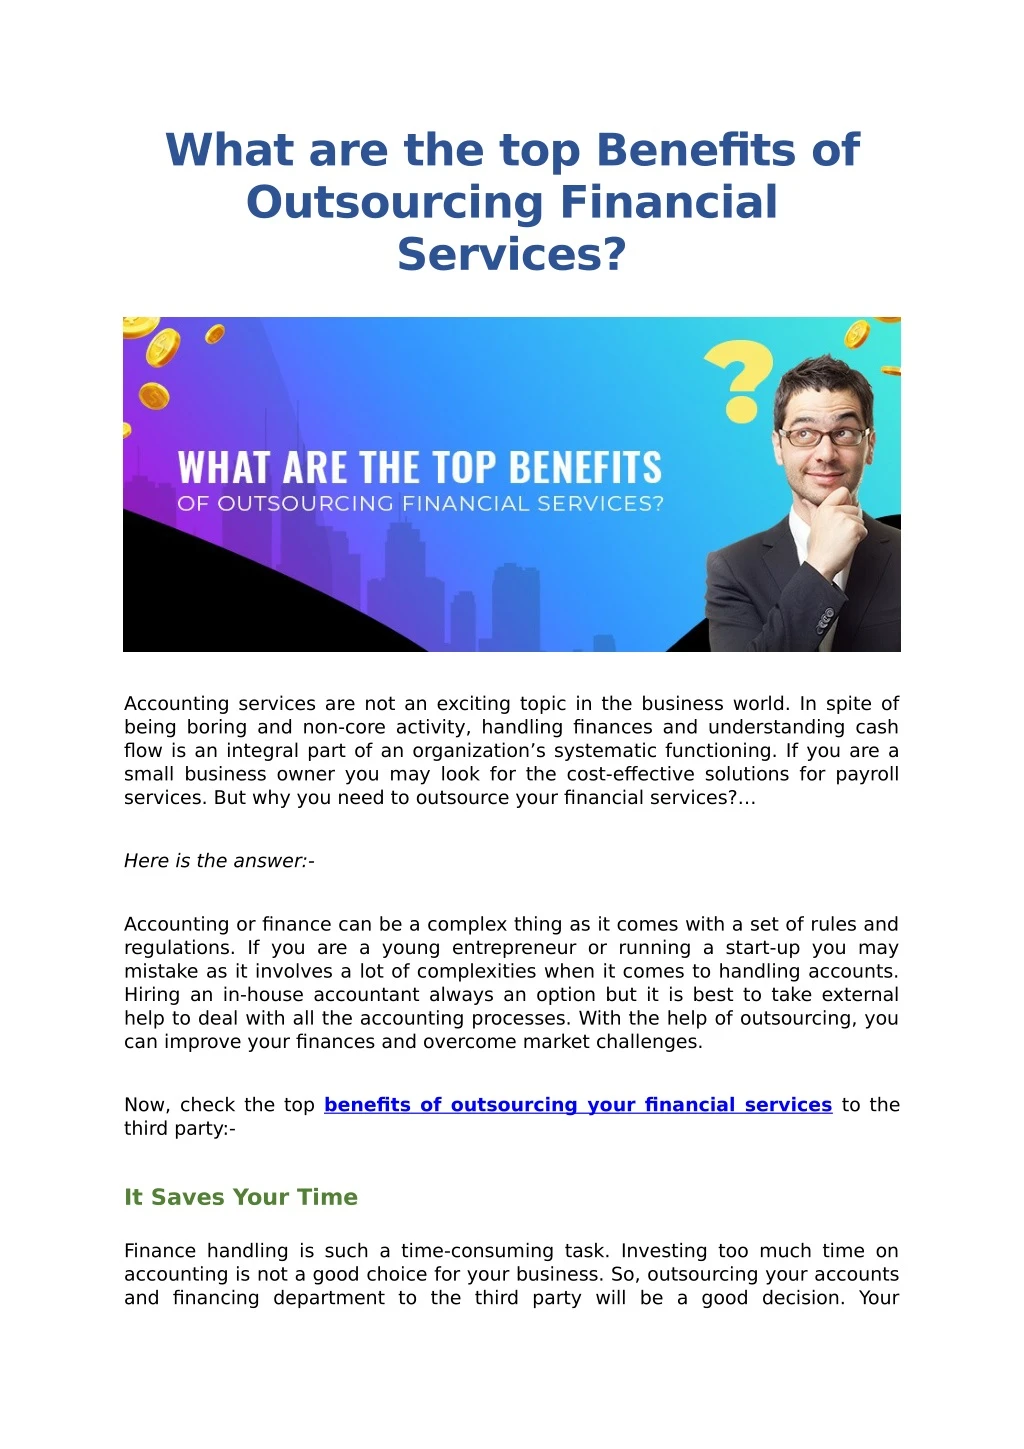 what are the top benefits of outsourcing